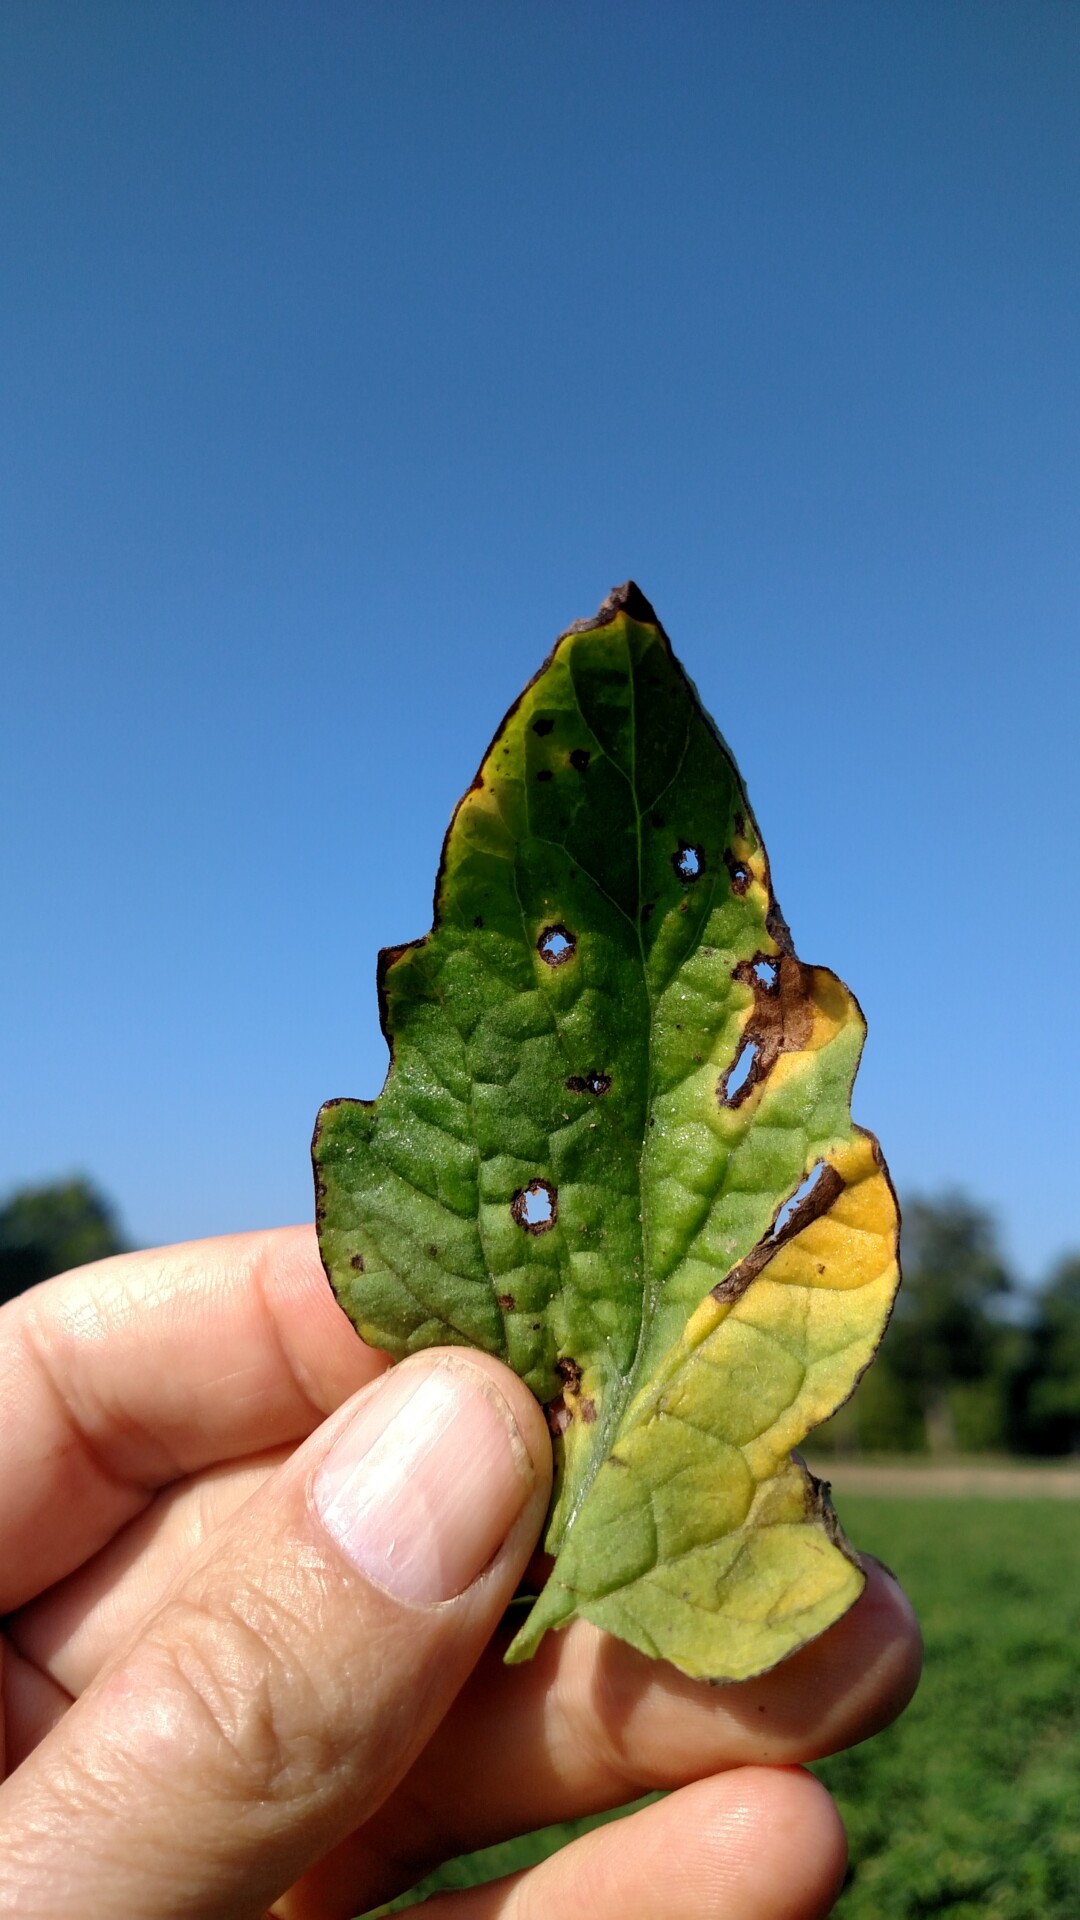 Symptoms caused by X. perforans on a tomato leaf